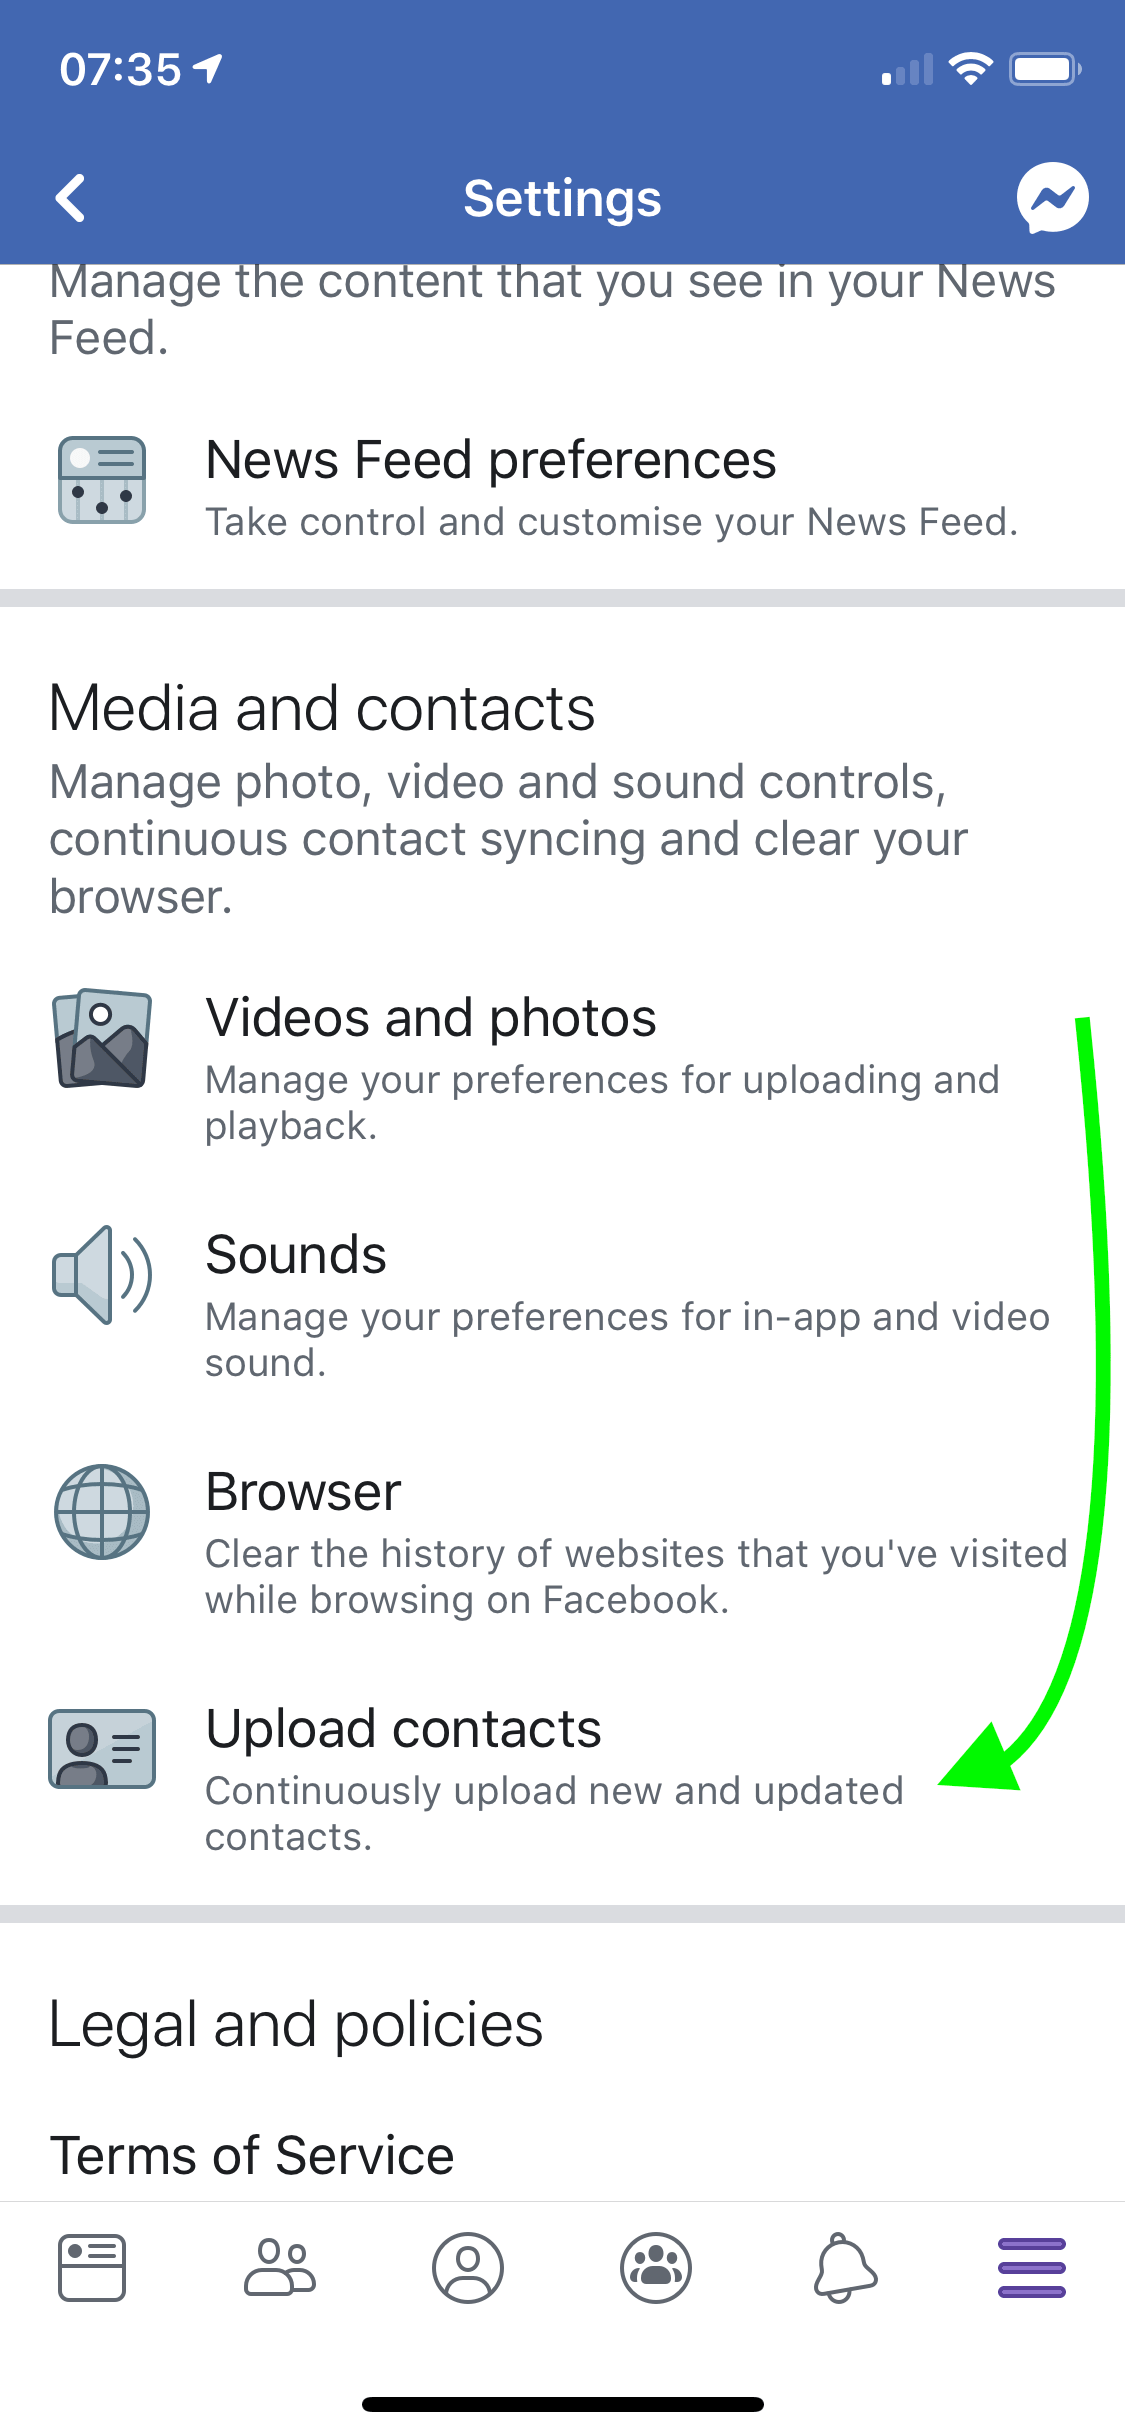 Facebook &gt; Settings &gt; Upload contacts